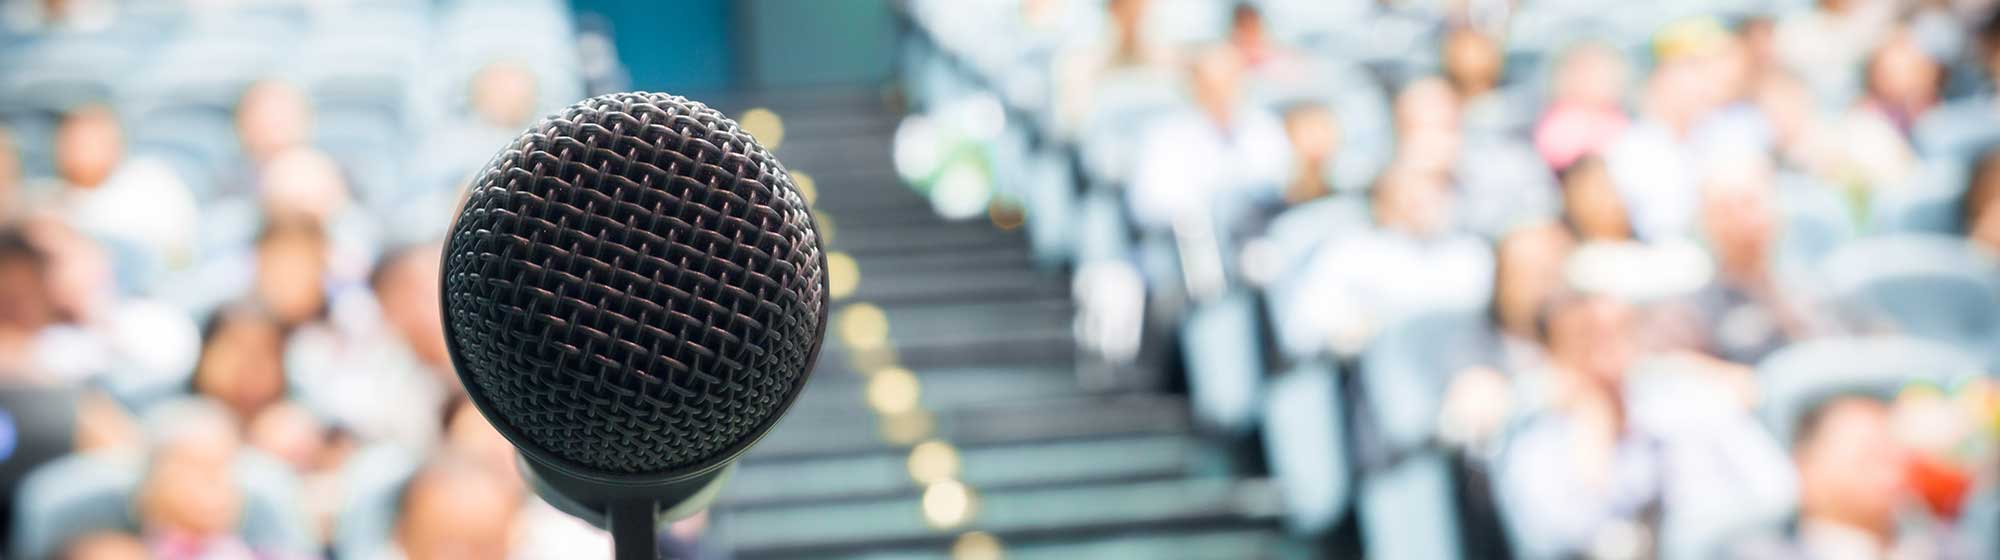 Microphone placed on a table during a conference